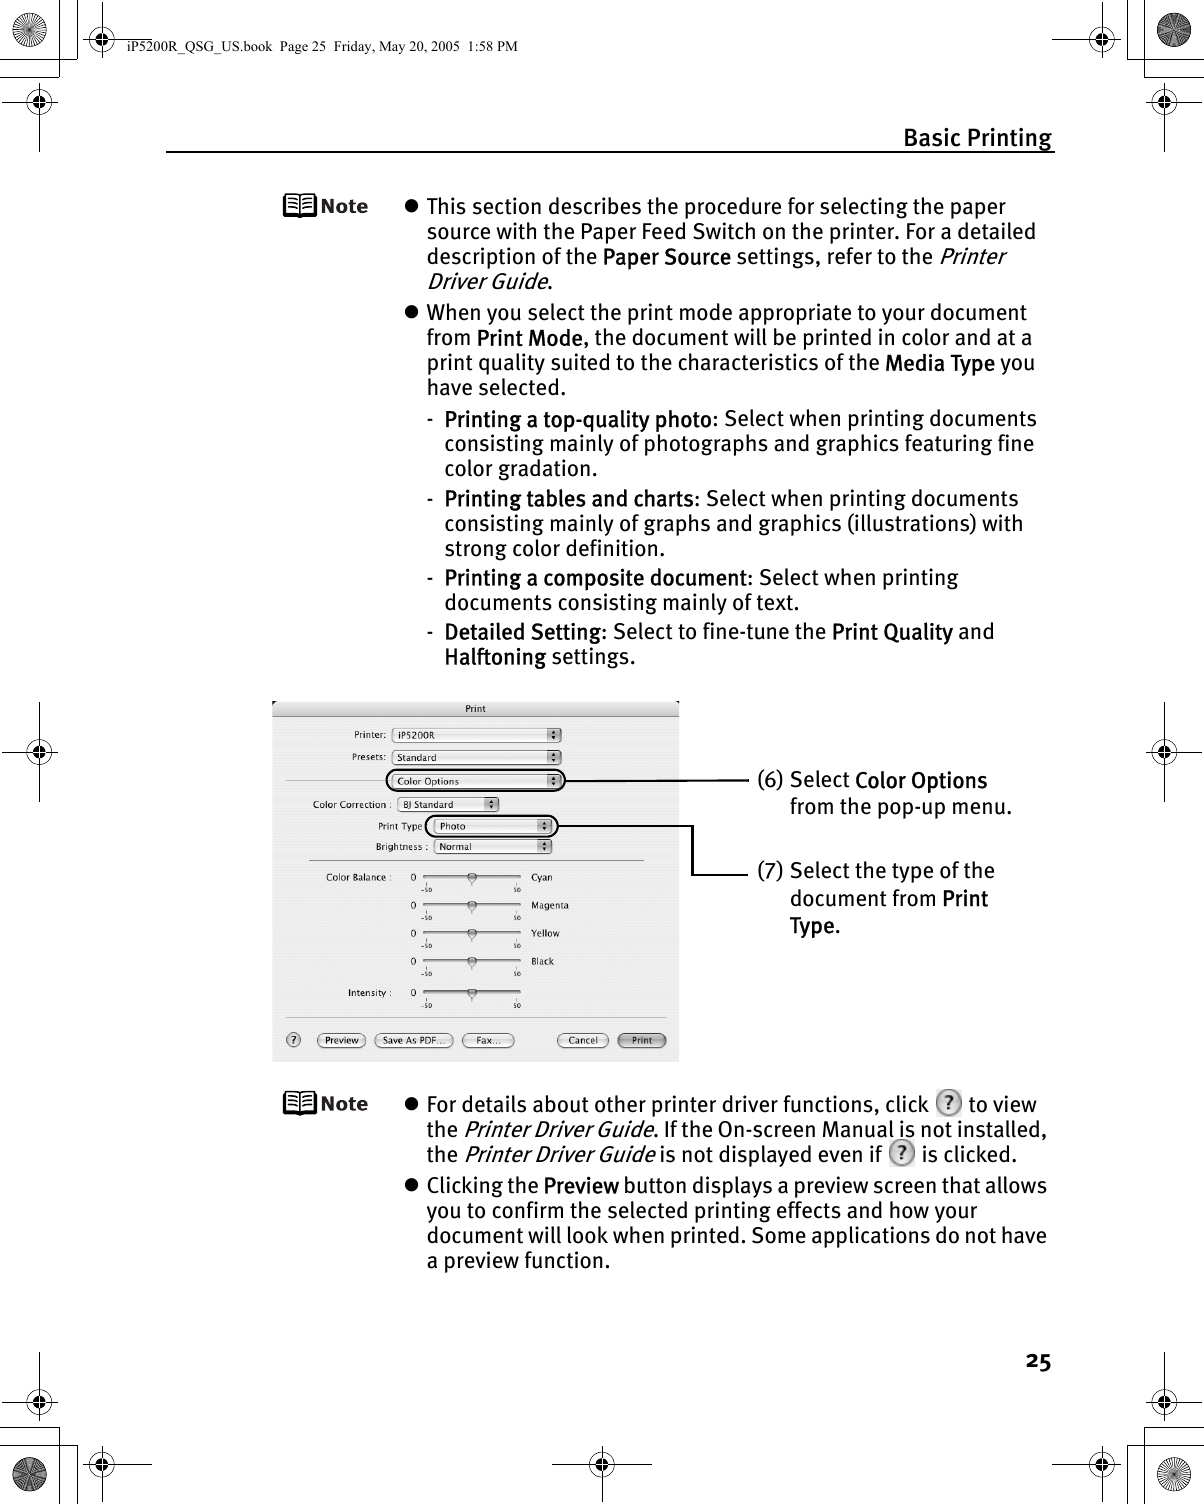 Basic Printing25zThis section describes the procedure for selecting the paper source with the Paper Feed Switch on the printer. For a detailed description of the Paper Source settings, refer to the Printer Driver Guide.zWhen you select the print mode appropriate to your document from Print Mode, the document will be printed in color and at a print quality suited to the characteristics of the Media Type you have selected.-Printing a top-quality photo: Select when printing documents consisting mainly of photographs and graphics featuring fine color gradation.-Printing tables and charts: Select when printing documents consisting mainly of graphs and graphics (illustrations) with strong color definition.-Printing a composite document: Select when printing documents consisting mainly of text.-Detailed Setting: Select to fine-tune the Print Quality and Halftoning settings.zFor details about other printer driver functions, click   to view the Printer Driver Guide. If the On-screen Manual is not installed, the Printer Driver Guide is not displayed even if   is clicked.zClicking the Preview button displays a preview screen that allows you to confirm the selected printing effects and how your document will look when printed. Some applications do not have a preview function.(6) Select Color Options from the pop-up menu.(7) Select the type of the document from Print Type.iP5200R_QSG_US.book  Page 25  Friday, May 20, 2005  1:58 PM